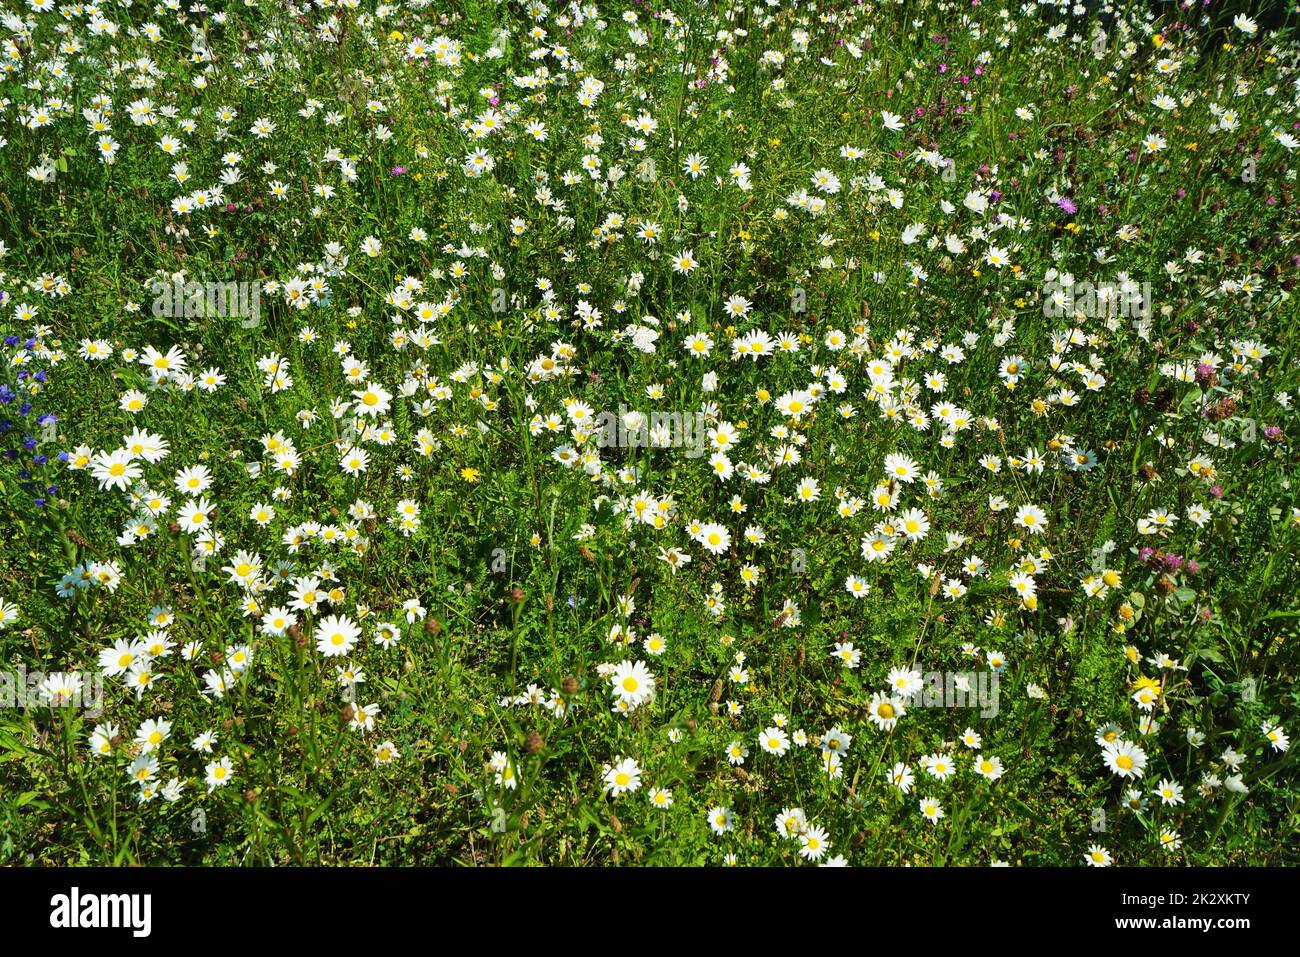 Colorful flower meadow in June Stock Photo